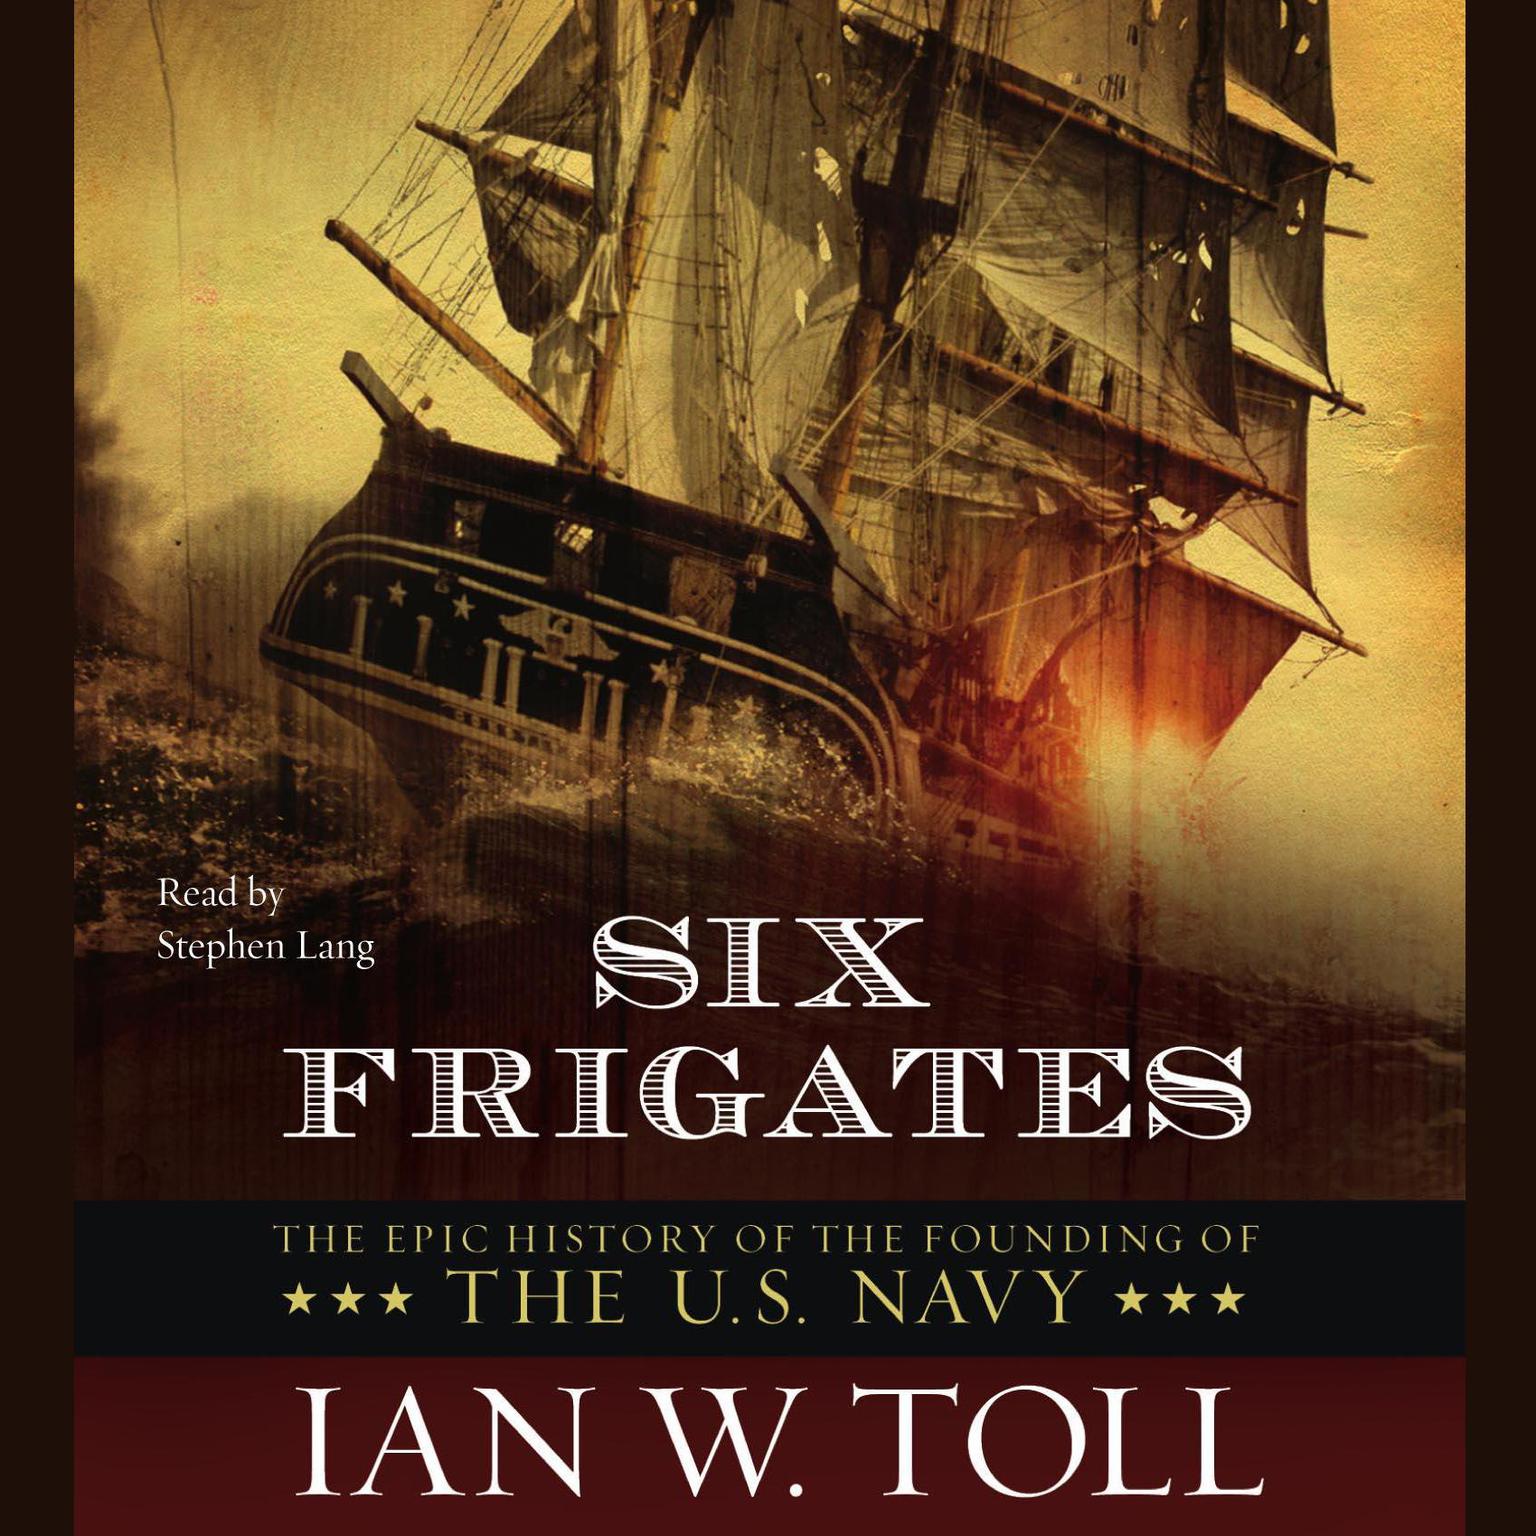 Six Frigates (Abridged): The Epic History of the Founding of the U.S. Navy Audiobook, by Ian W. Toll